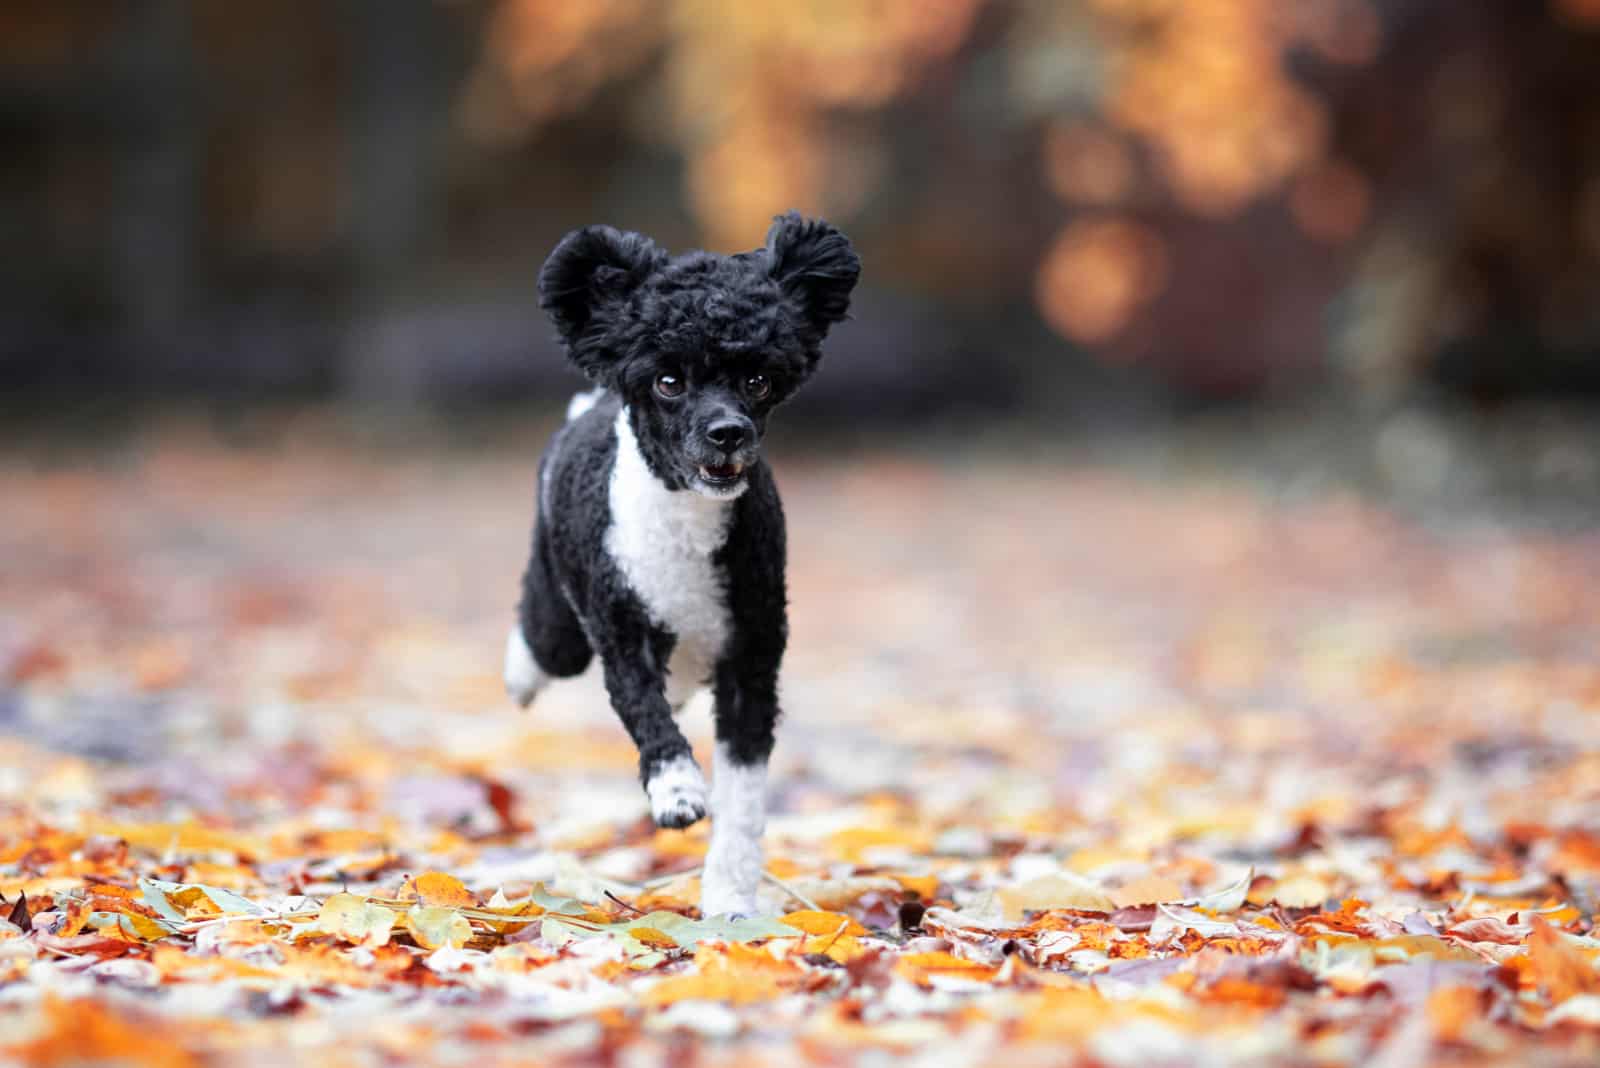 in Autumn a black and white poodle runs through the park